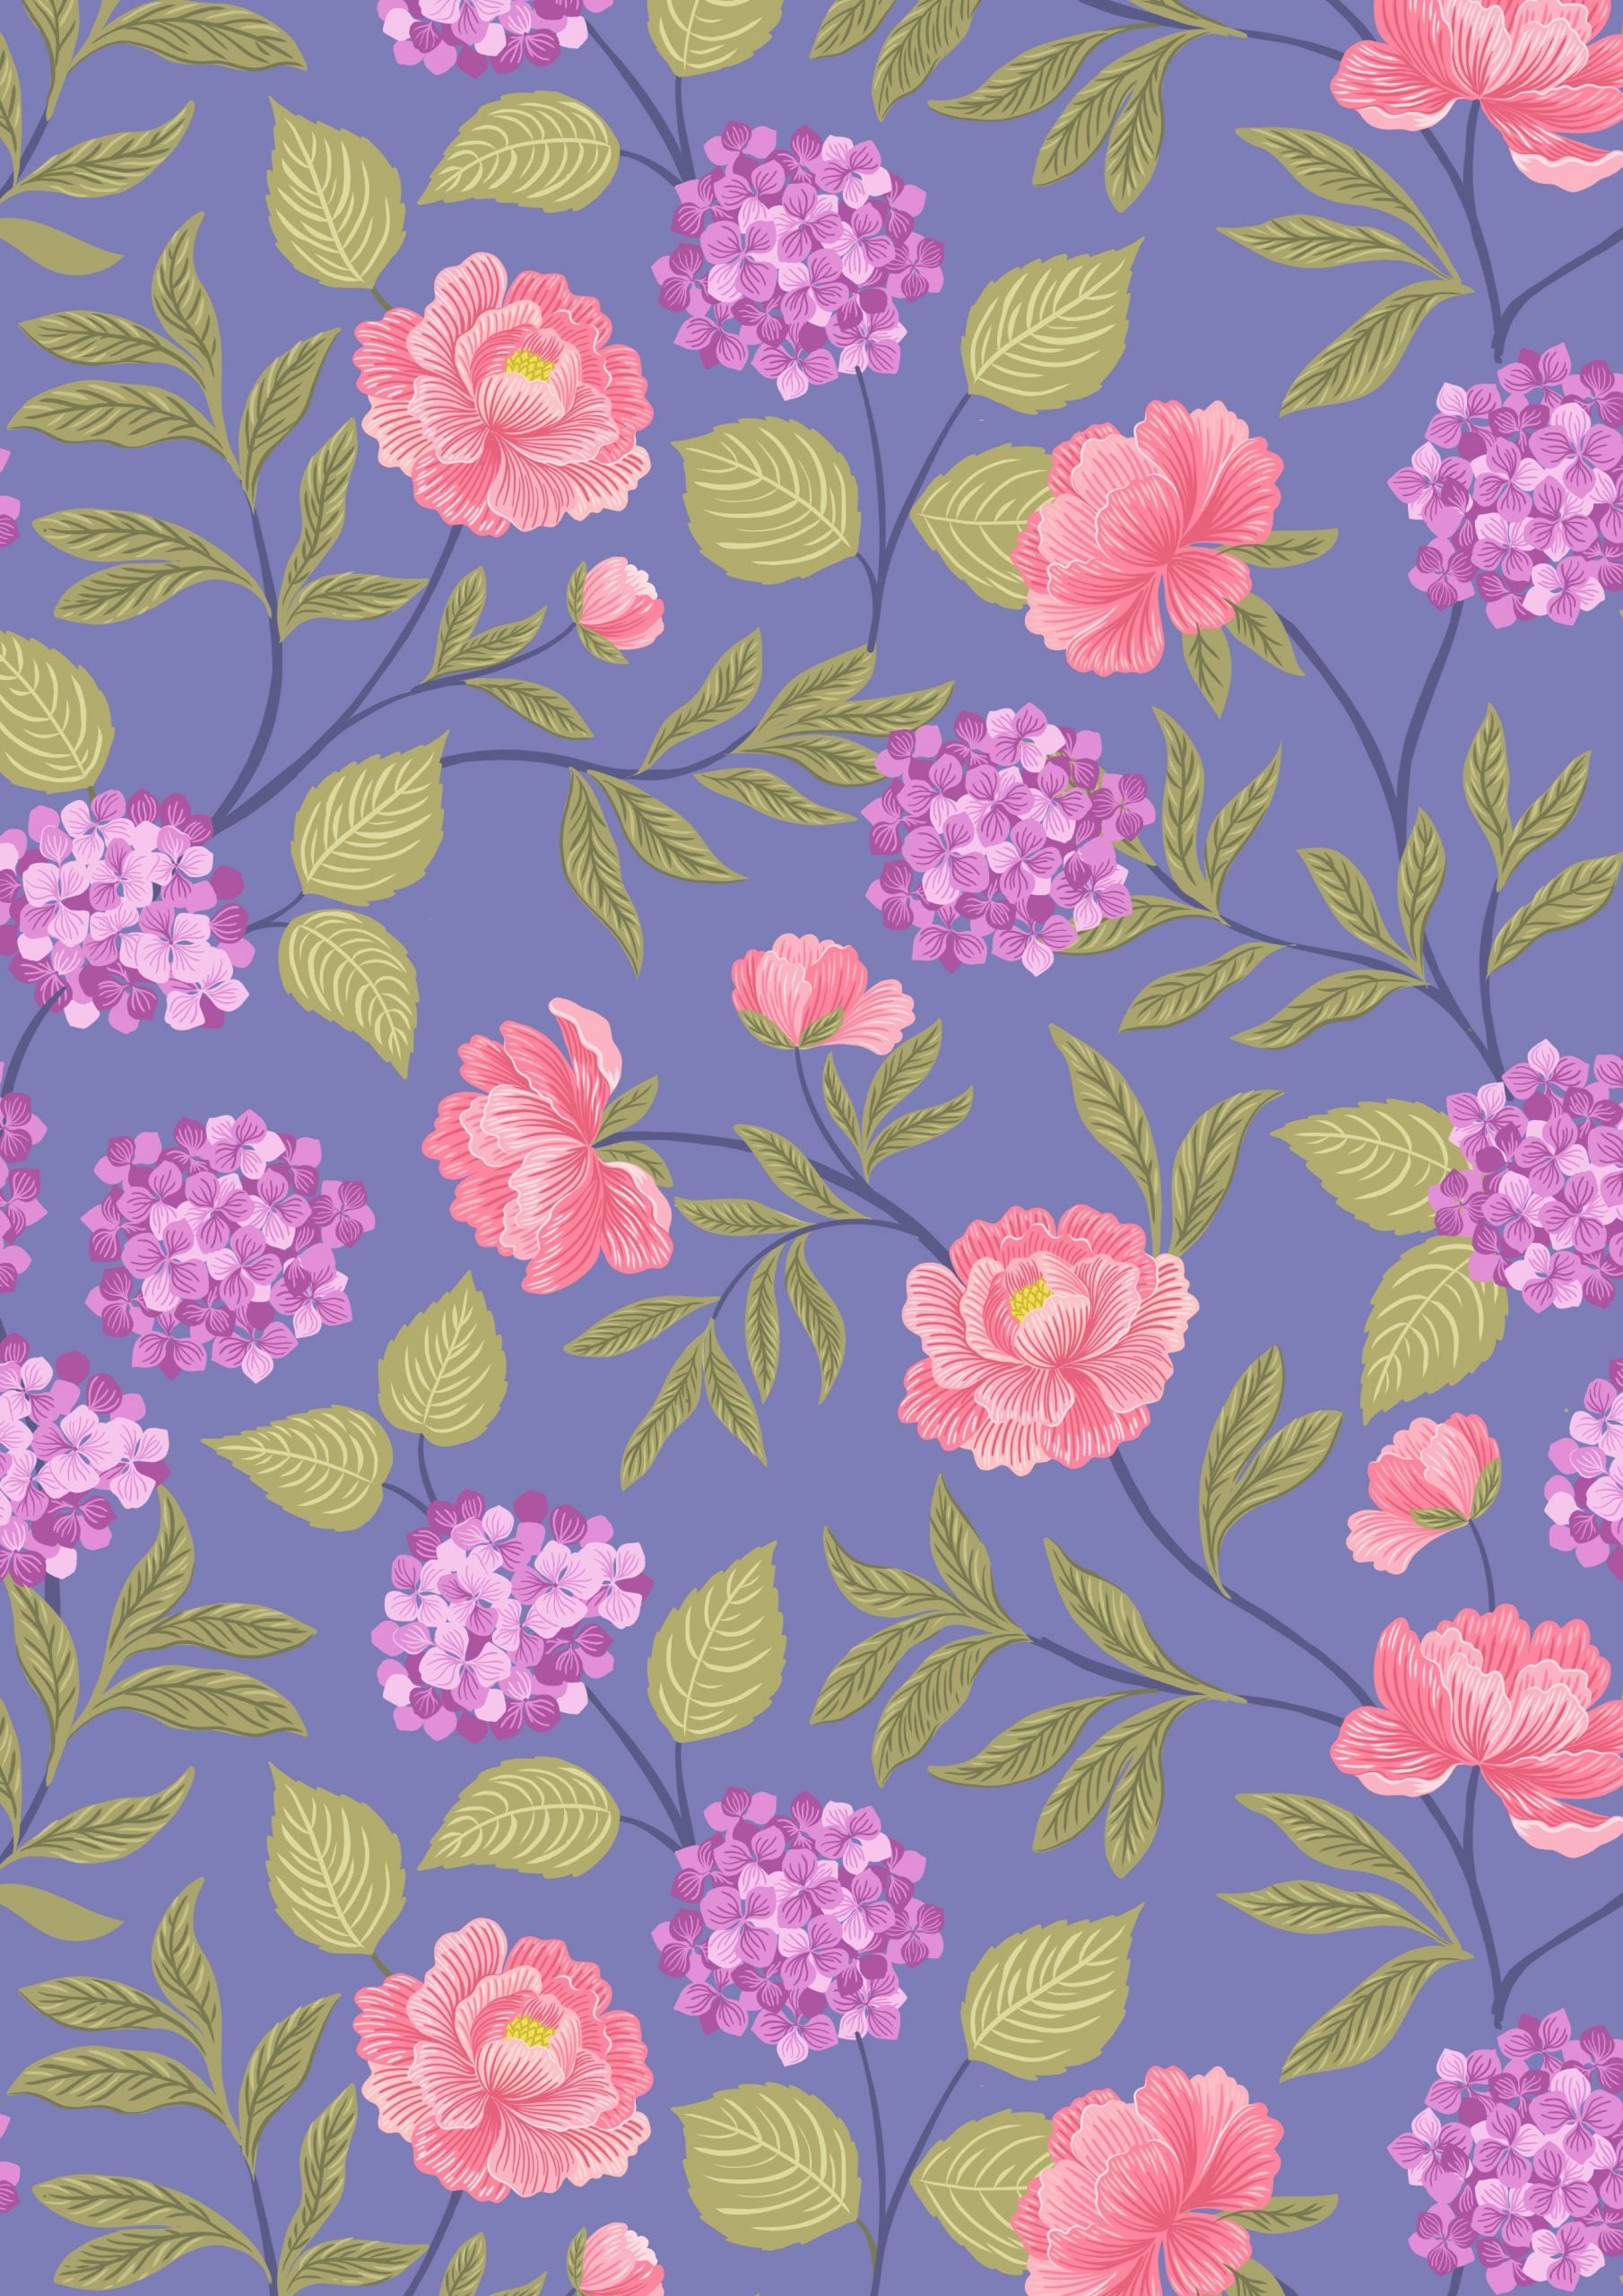 Lewis & Irene - Love Blooms - A521.3 Peony & Hydrangea on Floral Blue